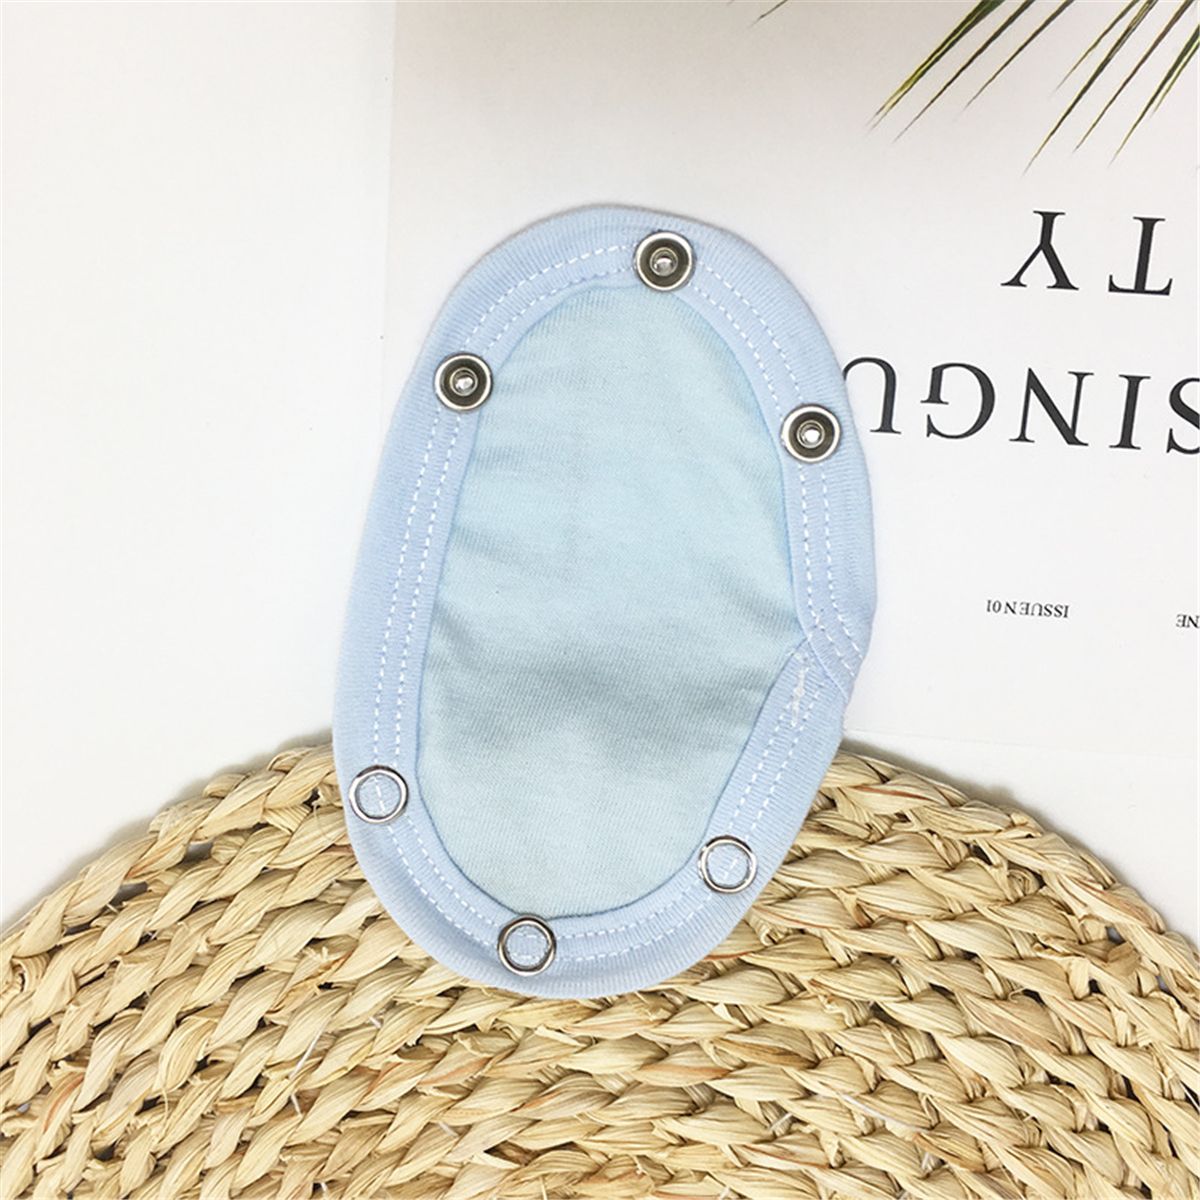 Baby Romper Lengthen Extend Pads Diaper Changing Pads Romper Partner Super Soft Infant Utility Body Wear Jumpsuit for Baby Care: blue	1pc